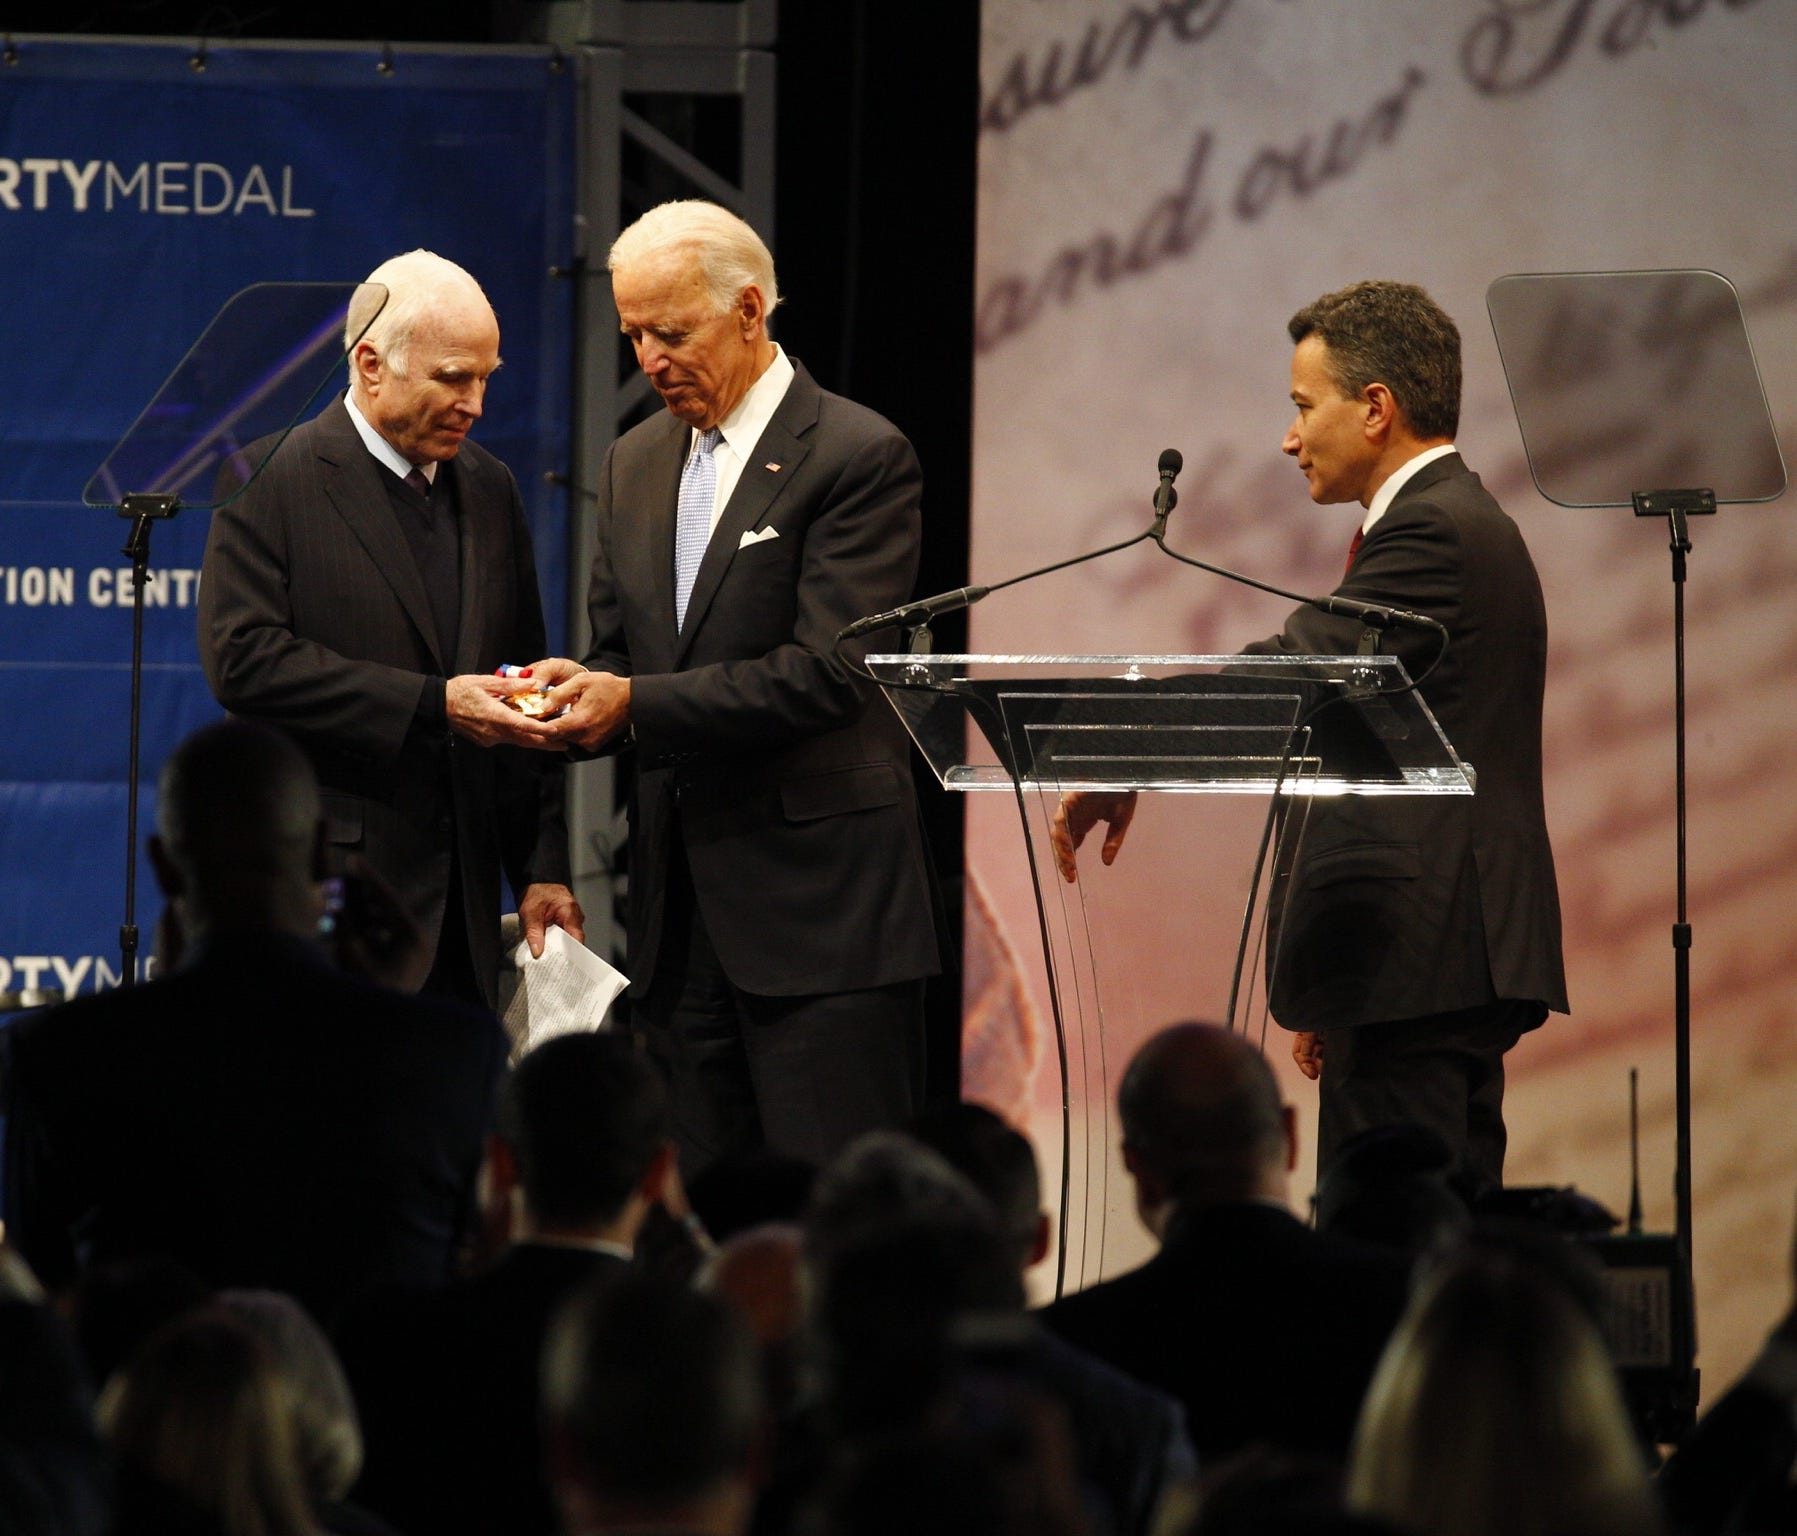 Former Vice President and chair of the National Constitution Center presents Sen. John McCain with the 2017 Liberty Medal Monday night at the National Constitution Center in Philadelphia.